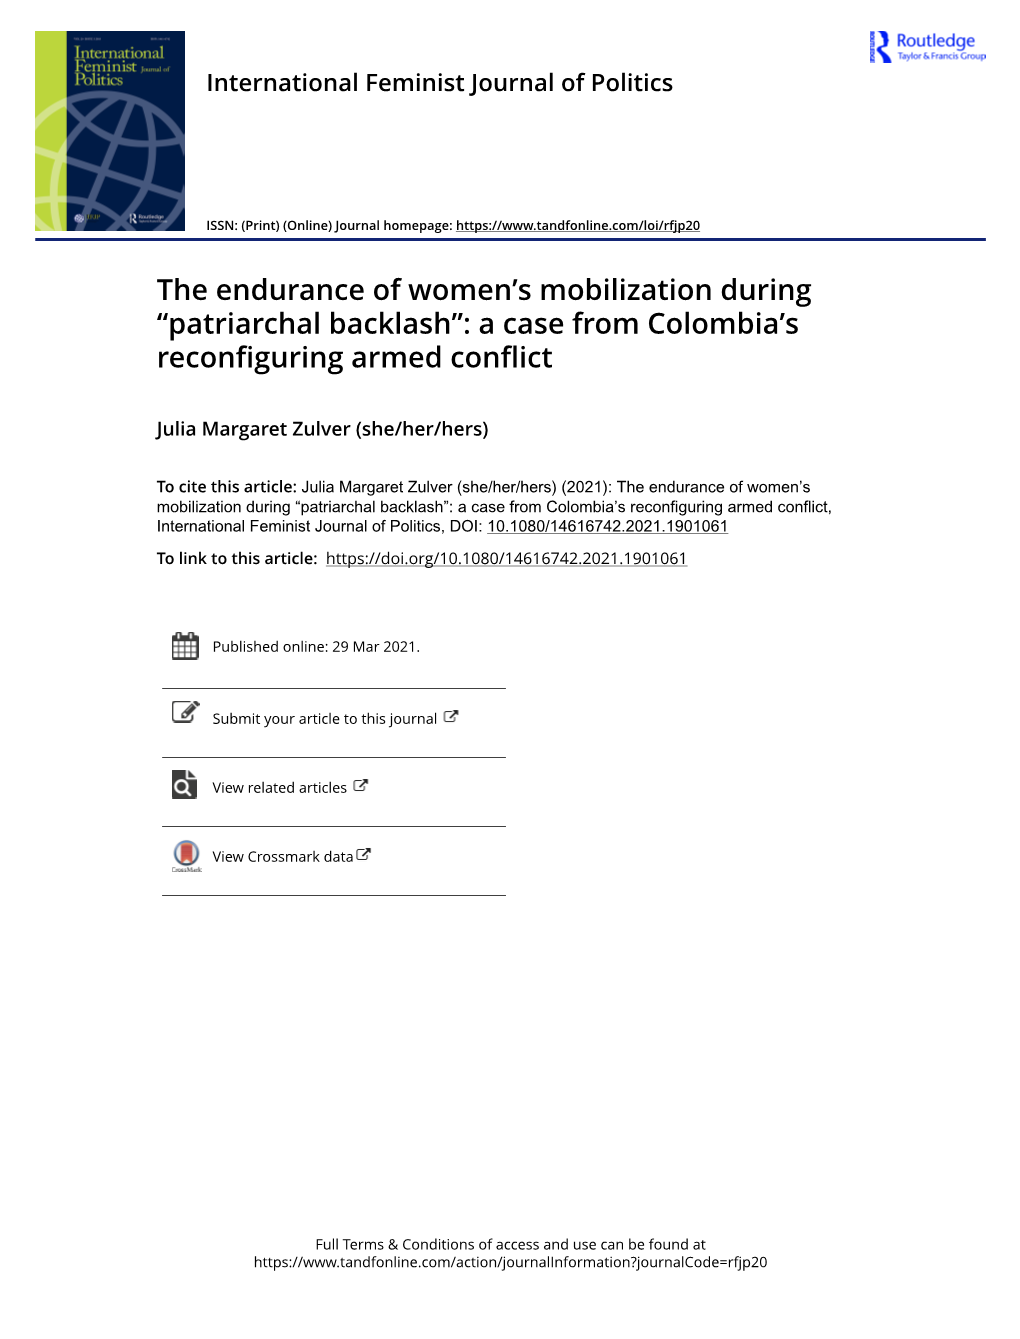 The Endurance of Women's Mobilization During “Patriarchal Backlash”: a Case from Colombia's Reconfig